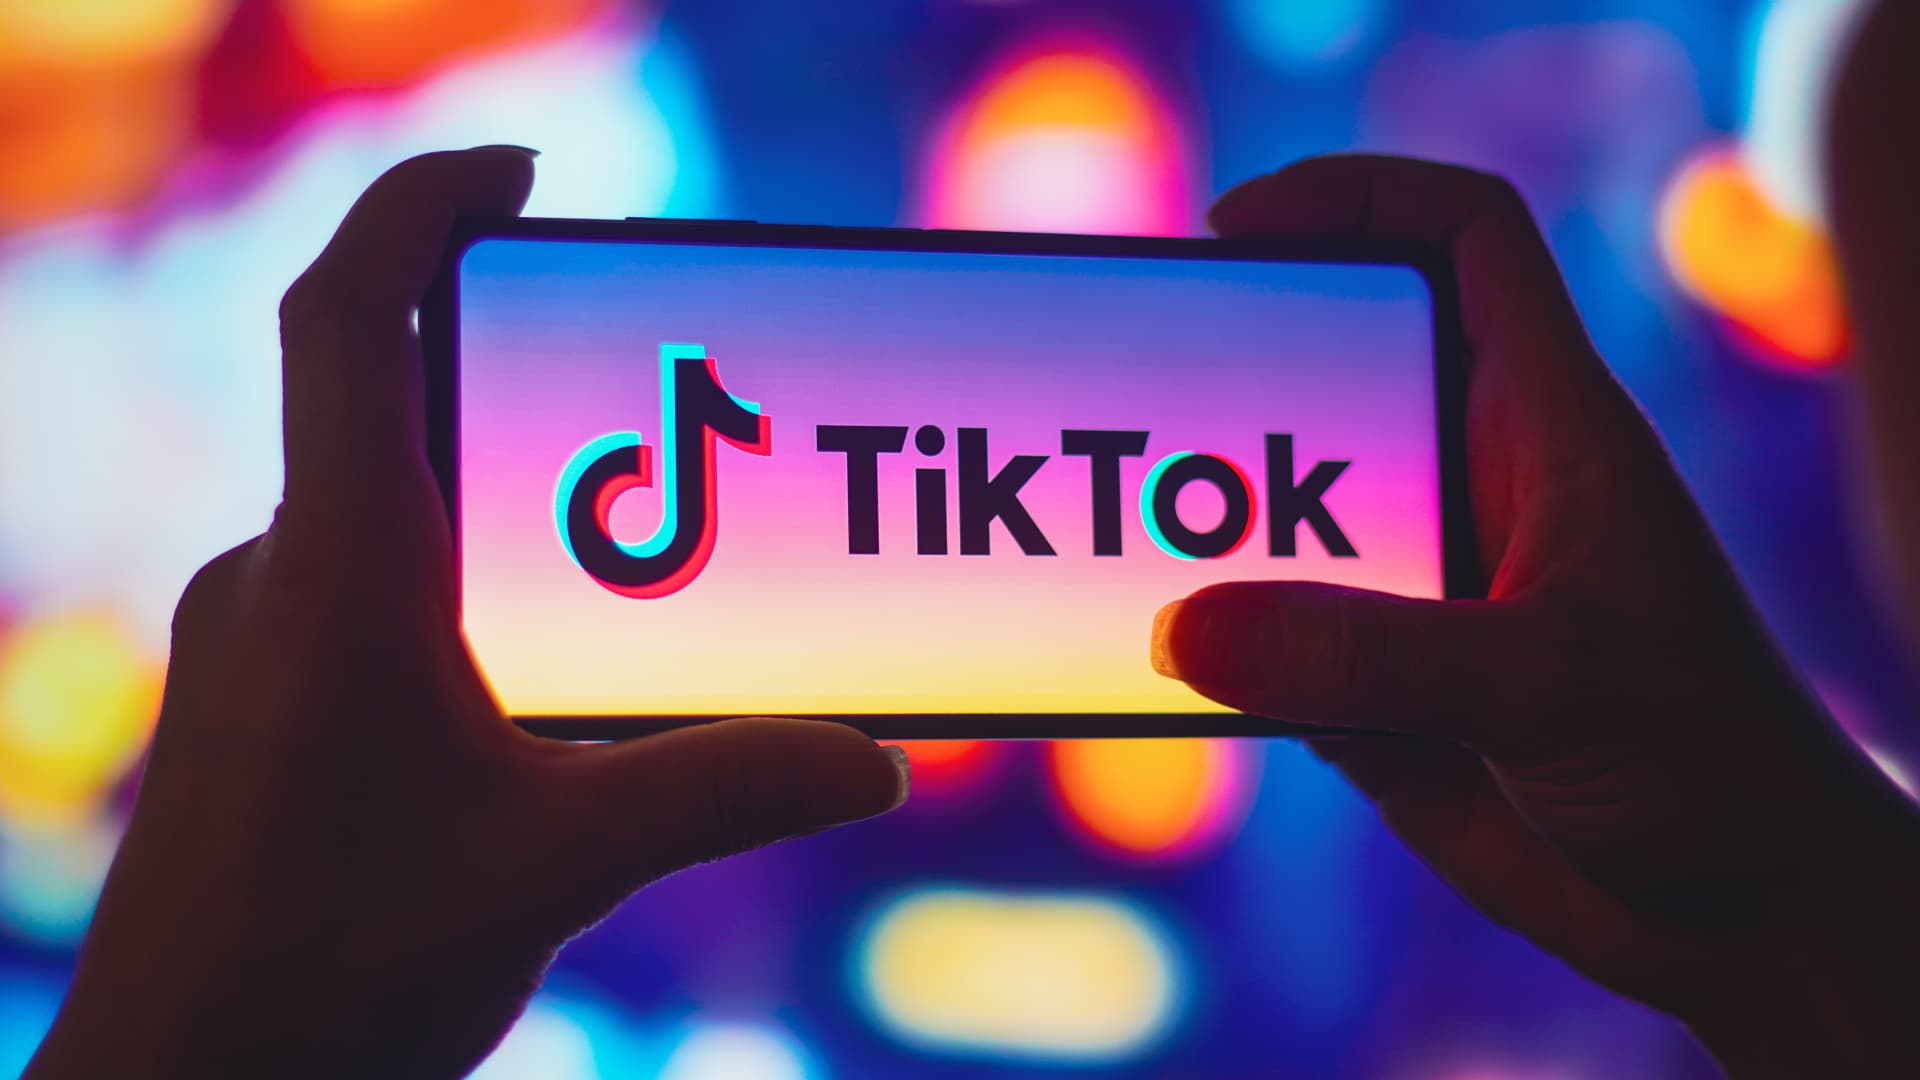 Chinese TikTok owner increased U.S. lobbying spend by 130% this quarter